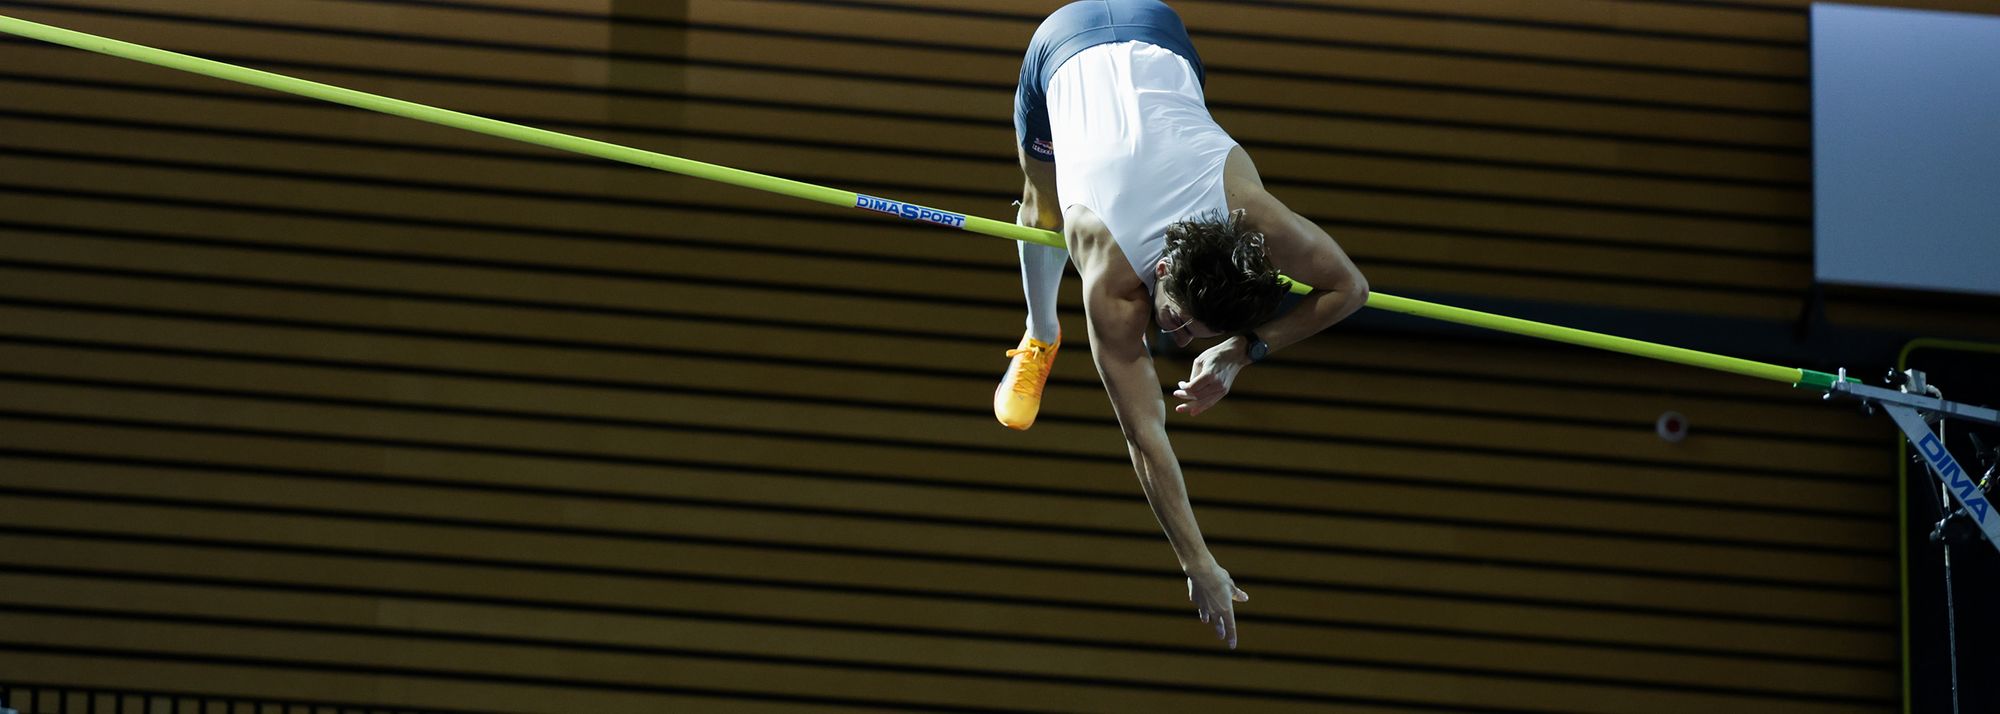 Mondo Duplantis cleared 6.22m to add one centimetre to his own world pole vault record at the All Star Perche, a World Athletics Indoor Tour Silver meeting